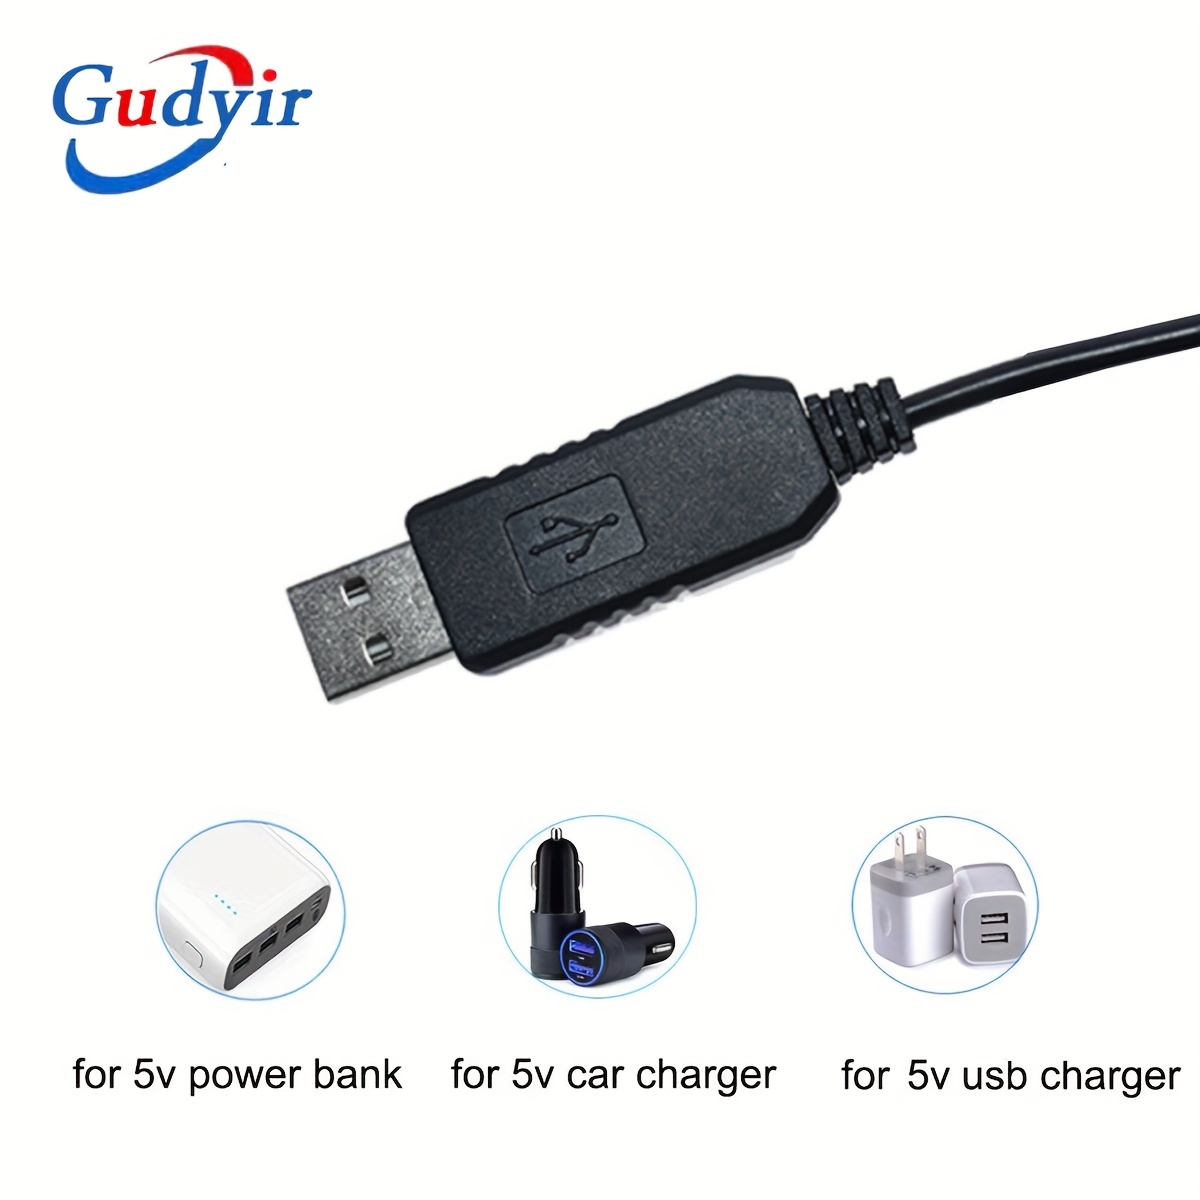 USB to DC Cable Power Bank Router Cord - StepUp Digital Display Adjustable  5V to 9V 12V - Convert and Boost Voltage - Suitable for 5521m DC